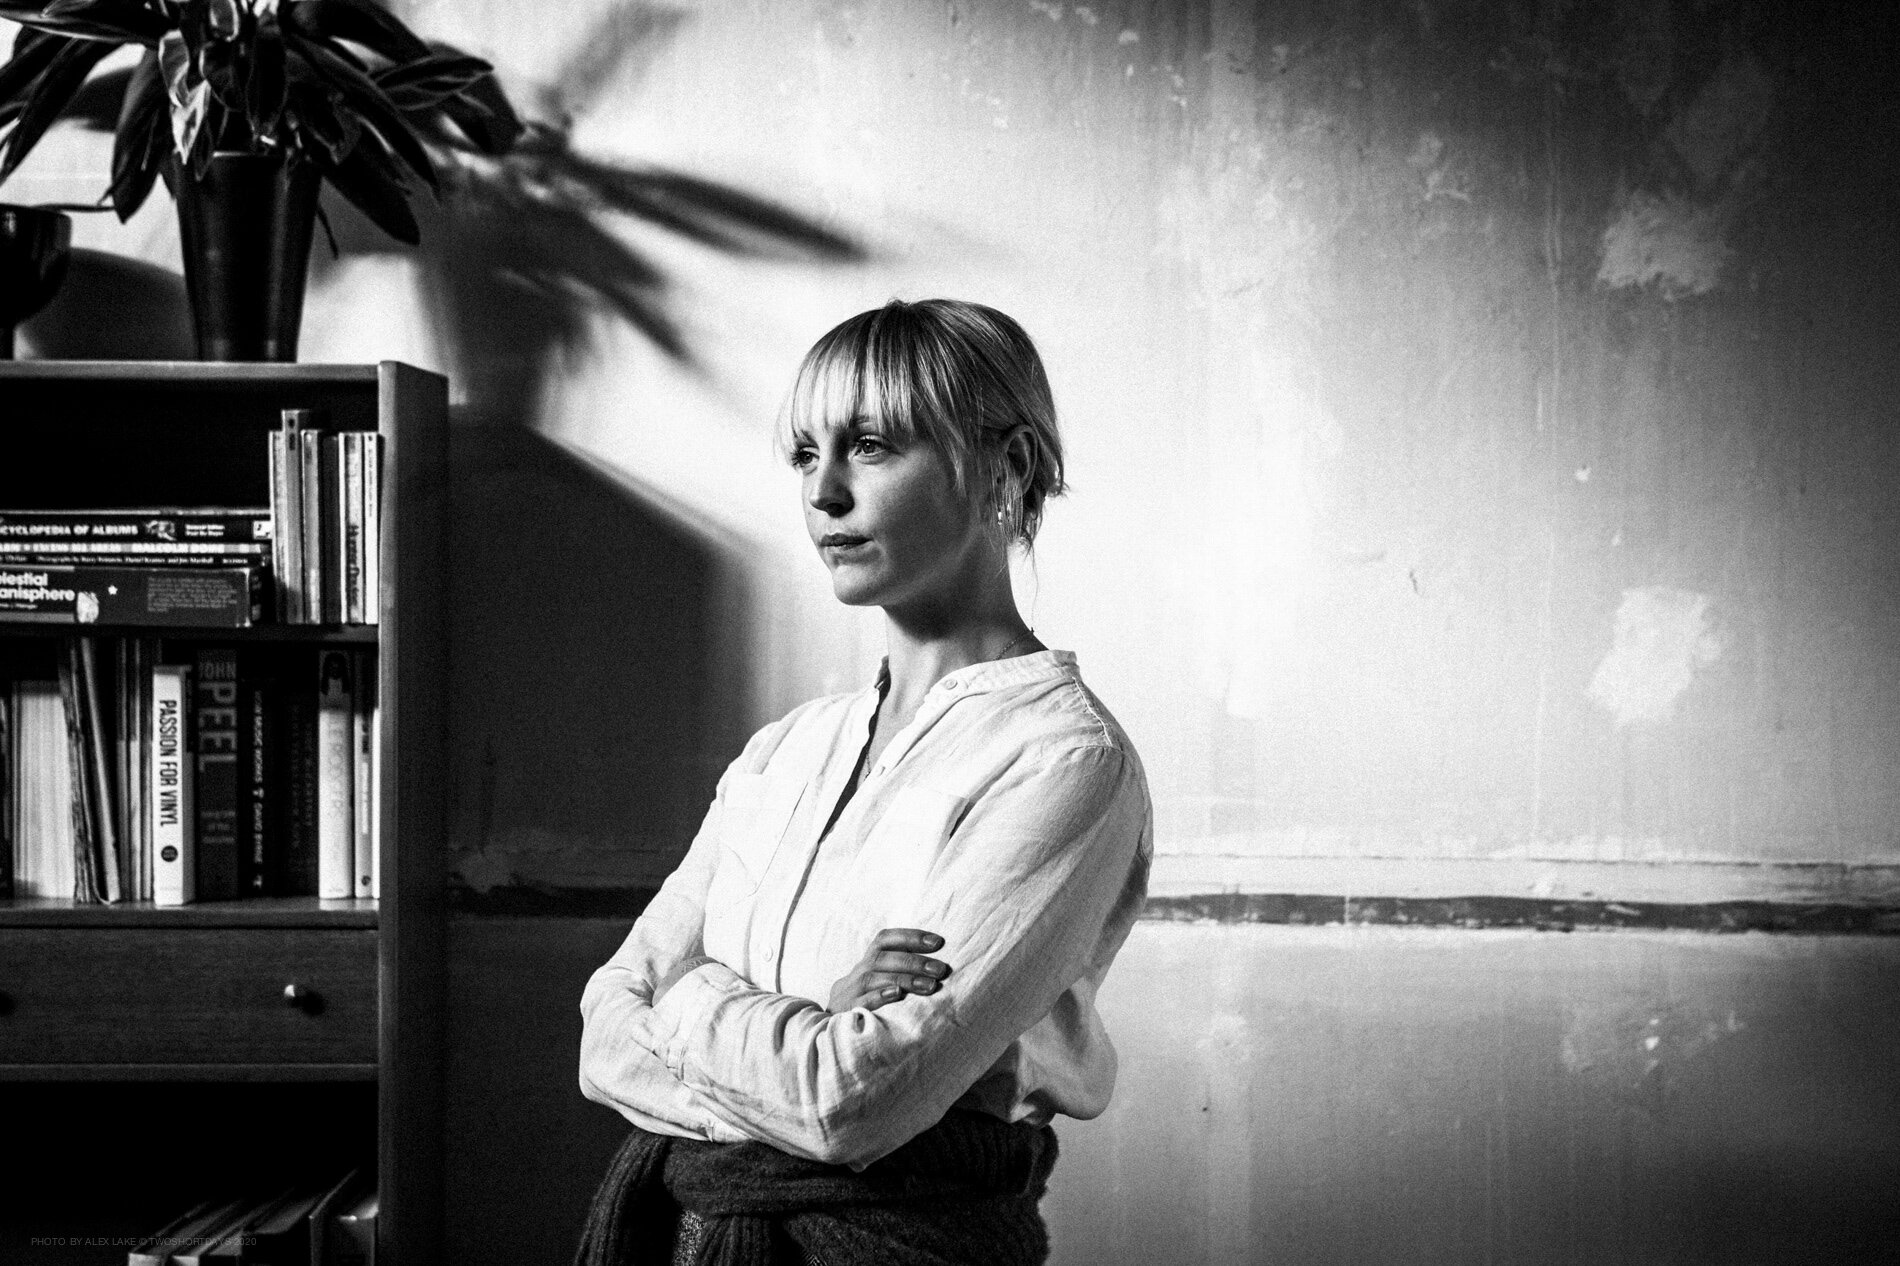 Laura_marling_02_photography_copyright_ALEX_LAKE_do_not_reproduce_without_permission_TWOSHORTDAYS.jpg